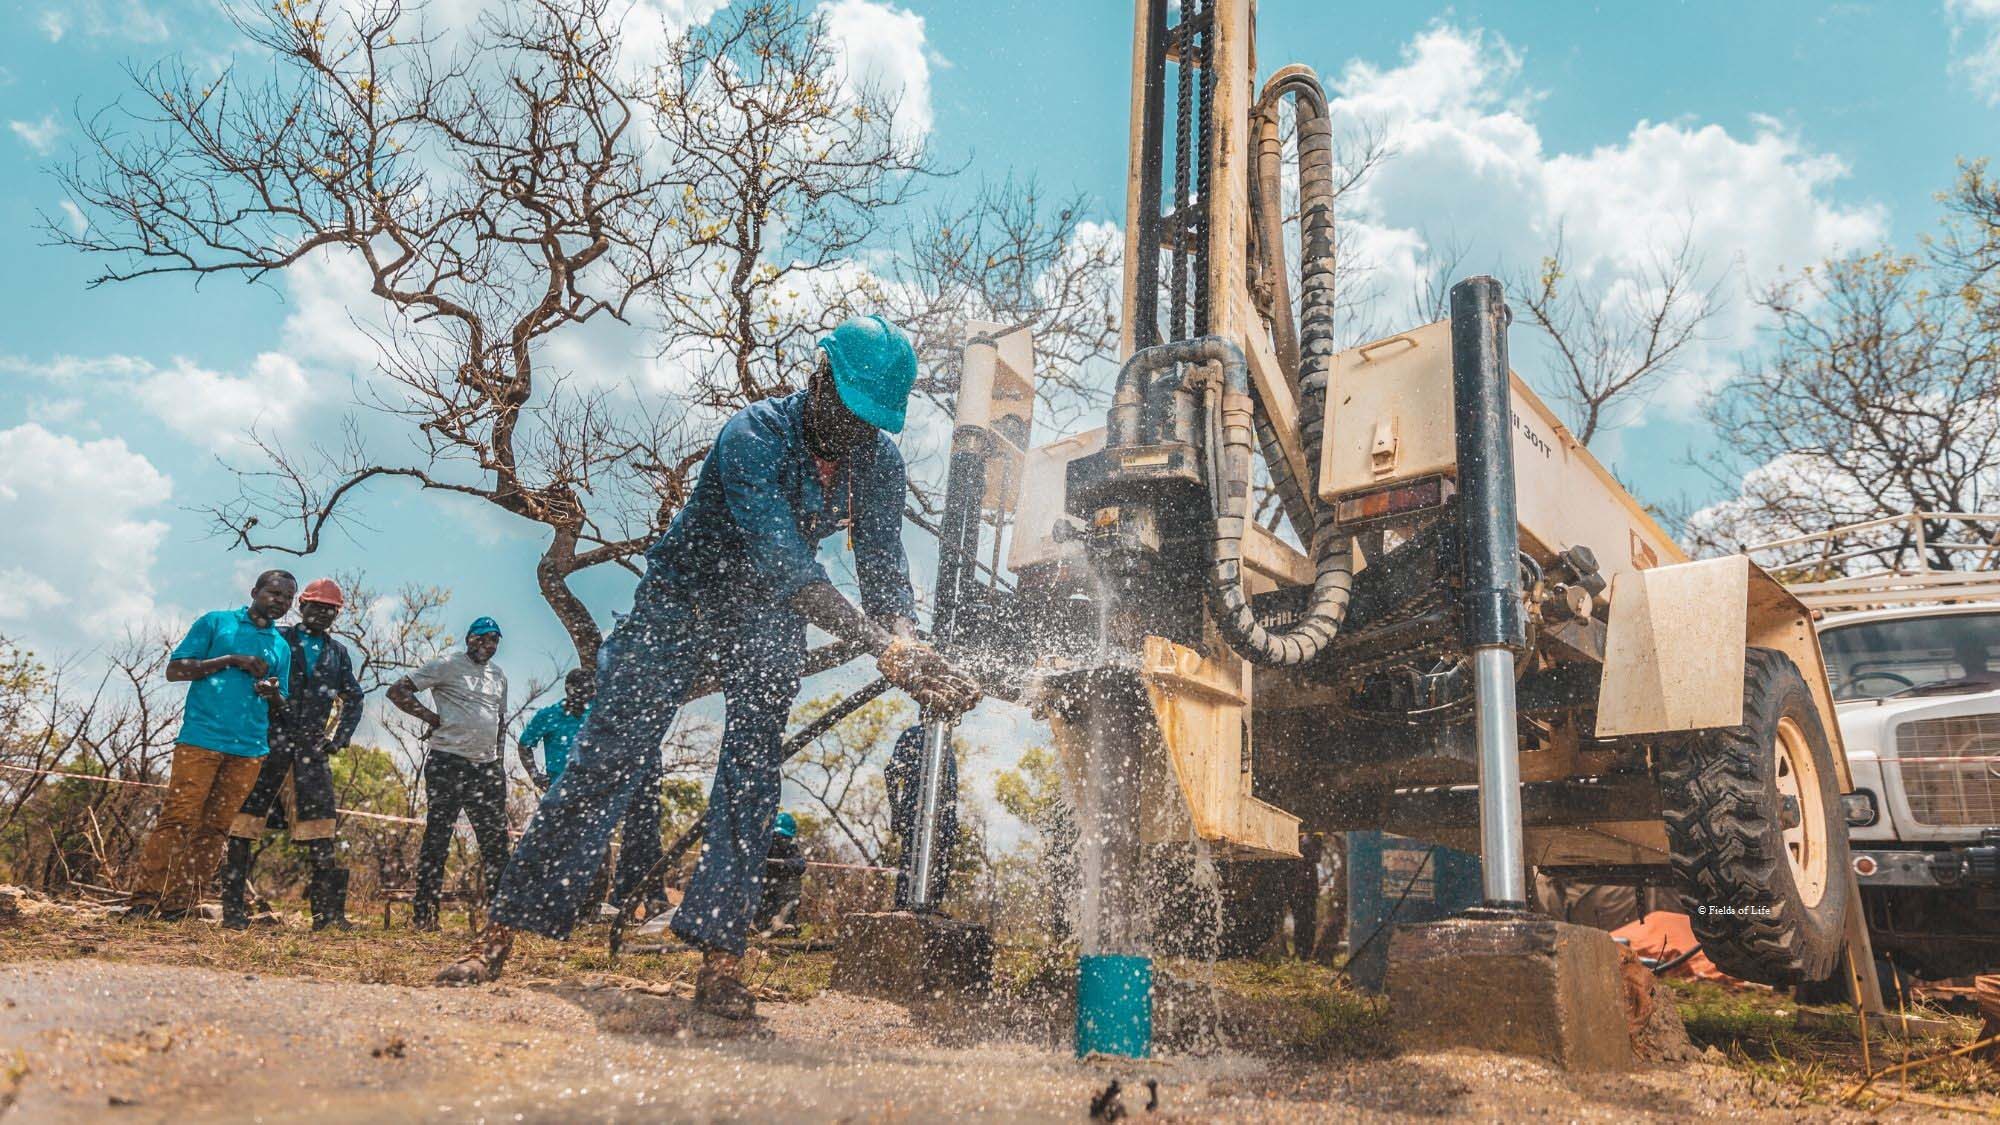 Drilling for water in Uganda as part of the Smart Water project.